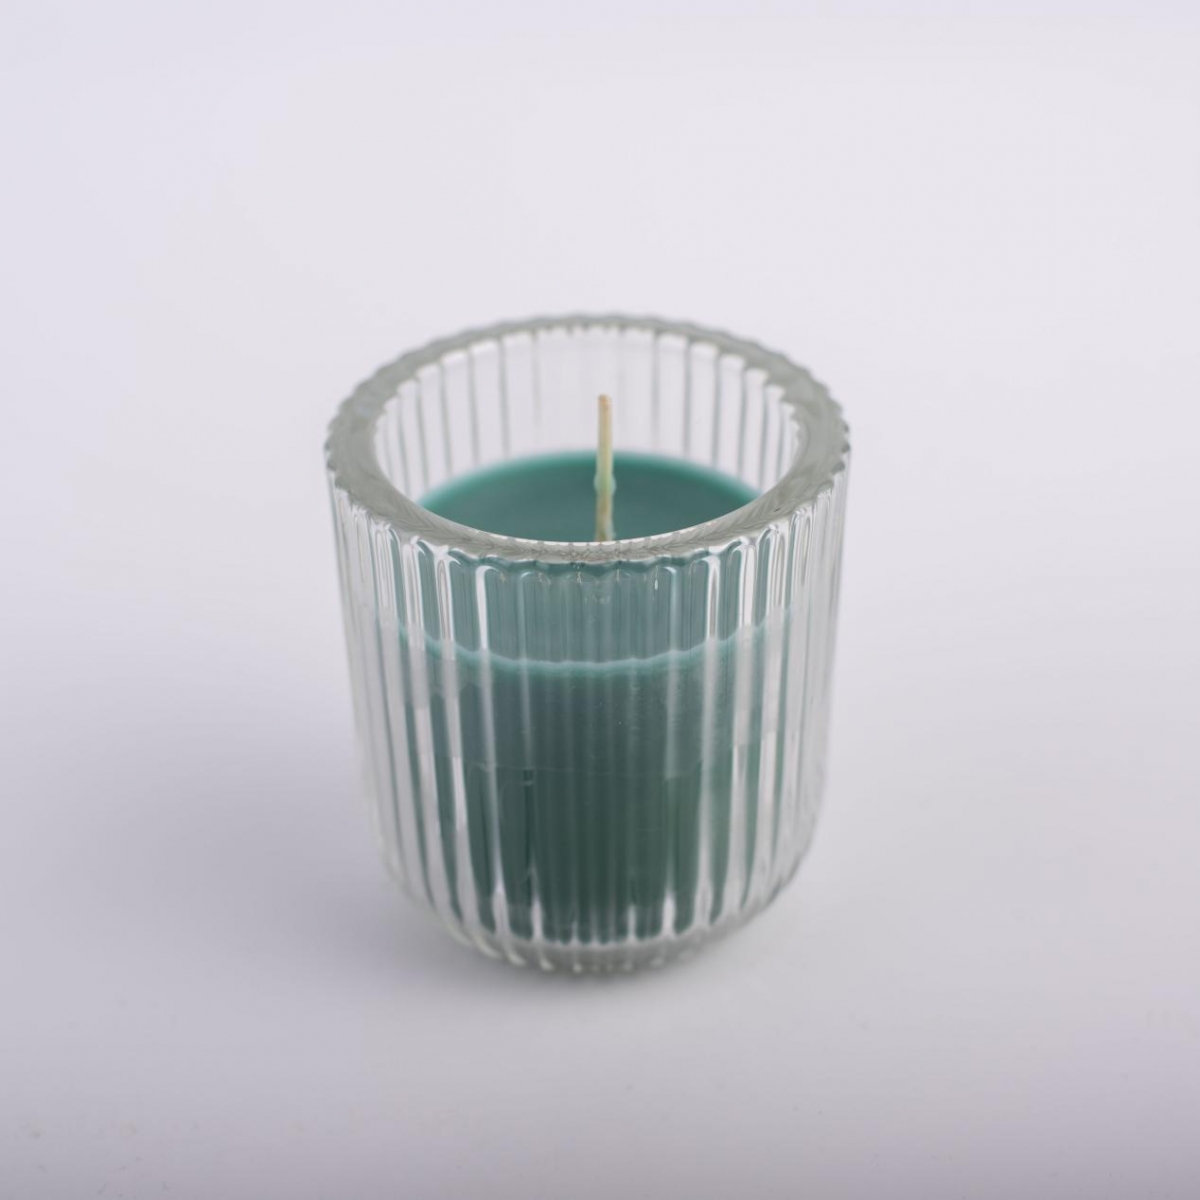 Christmas Scented Candles – Thick Wall Glass ,Green Candles, China Factory ,Wholesale Price-HOWCANDLE-Candles,Scented Candles,Aromatherapy Candles,Soy Candles,Vegan Candles,Jar Candles,Pillar Candles,Candle Gift Sets,Essential Oils,Reed Diffuser,Candle Holder,